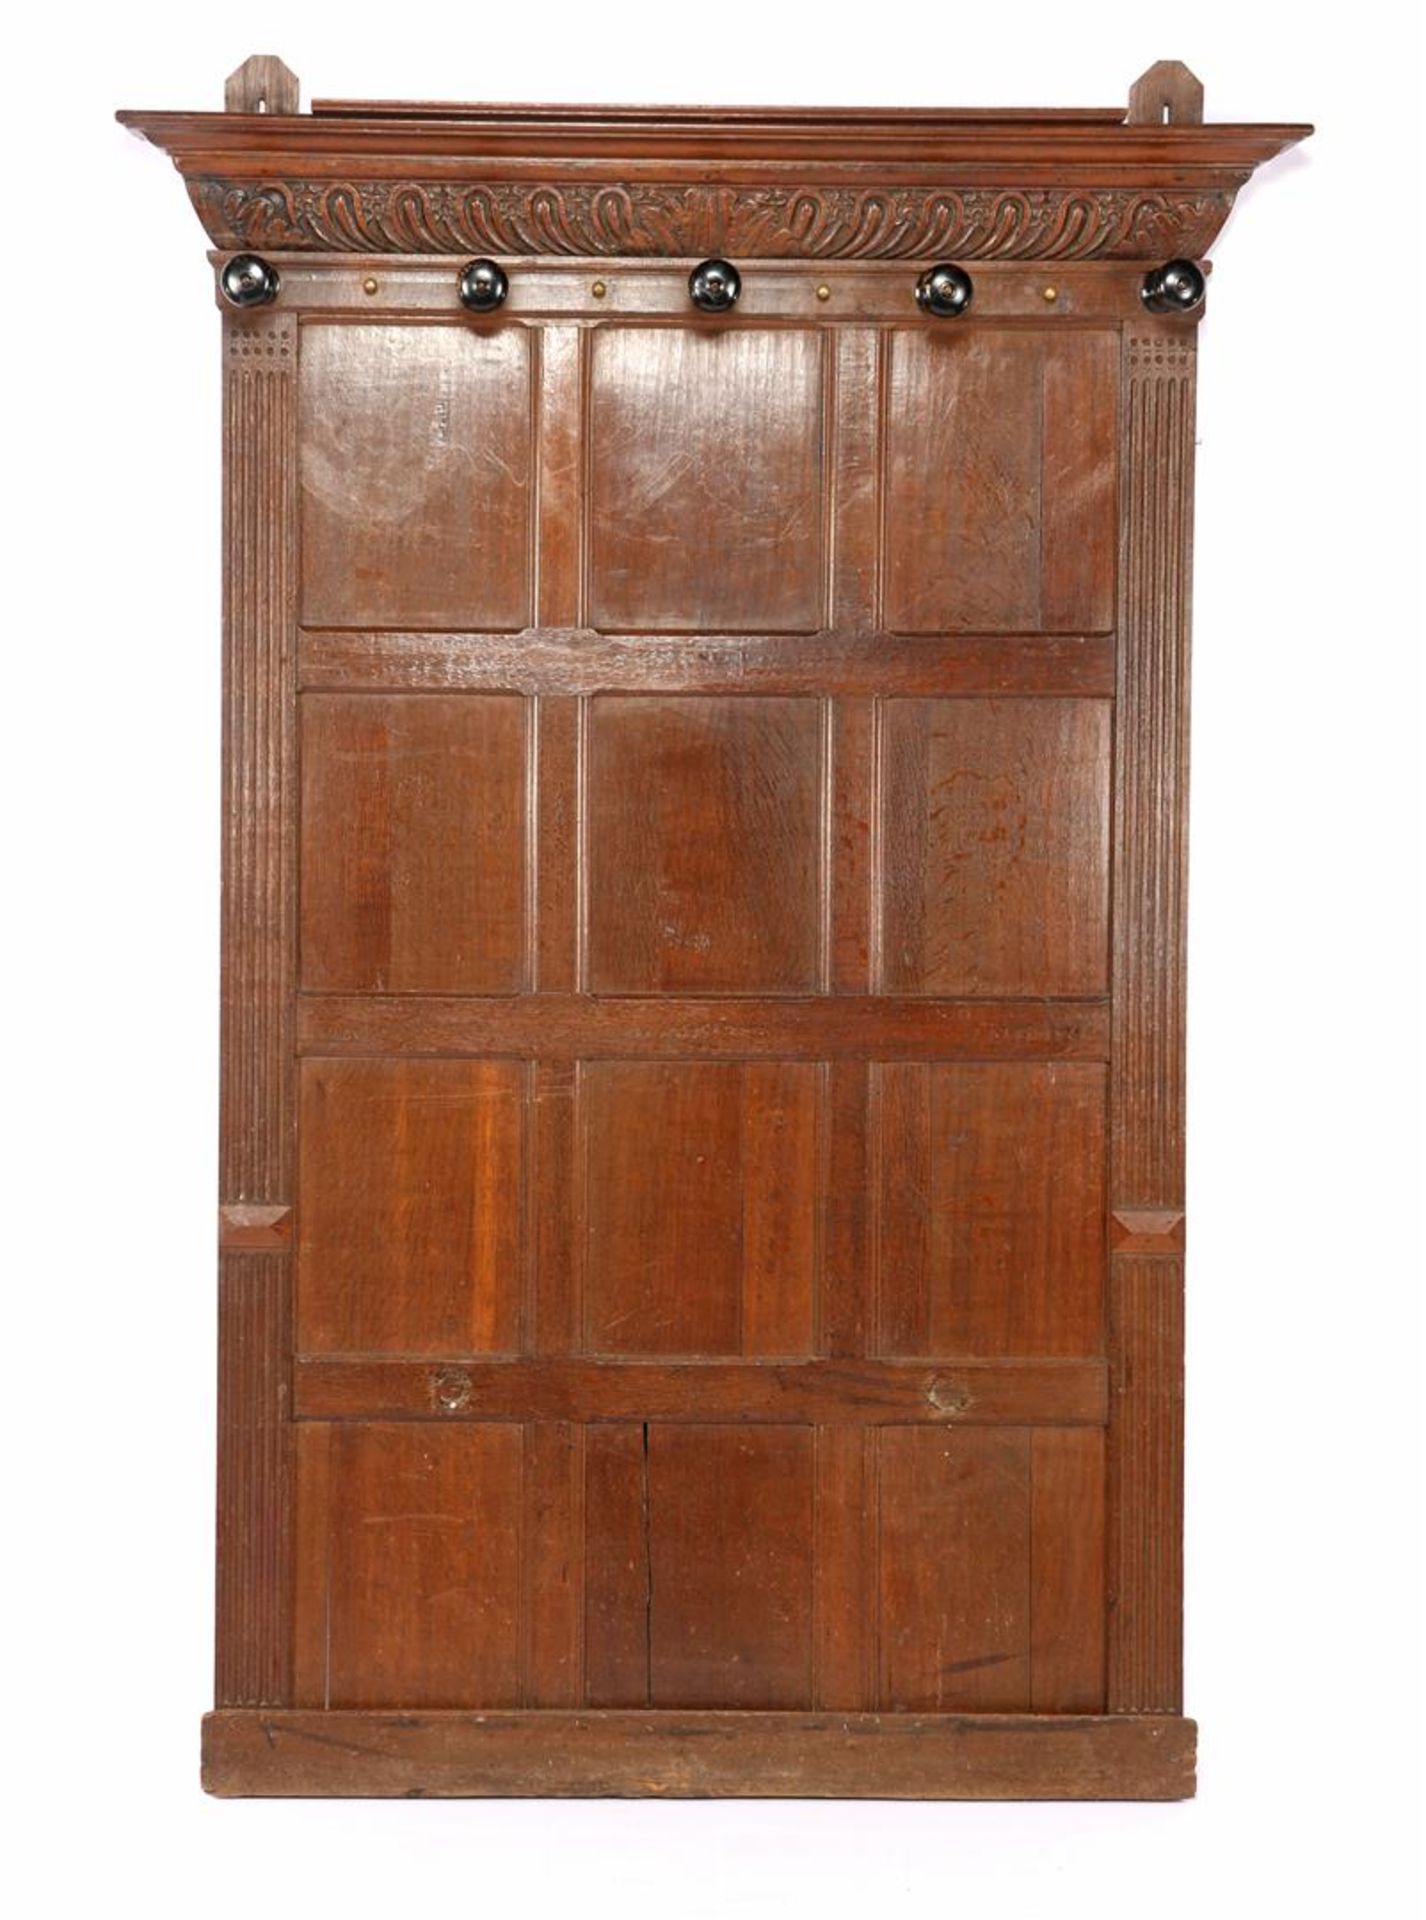 Oak coat rack with 5 wooden hooks, part of a paneling, 198 cm high, 139 cm wide